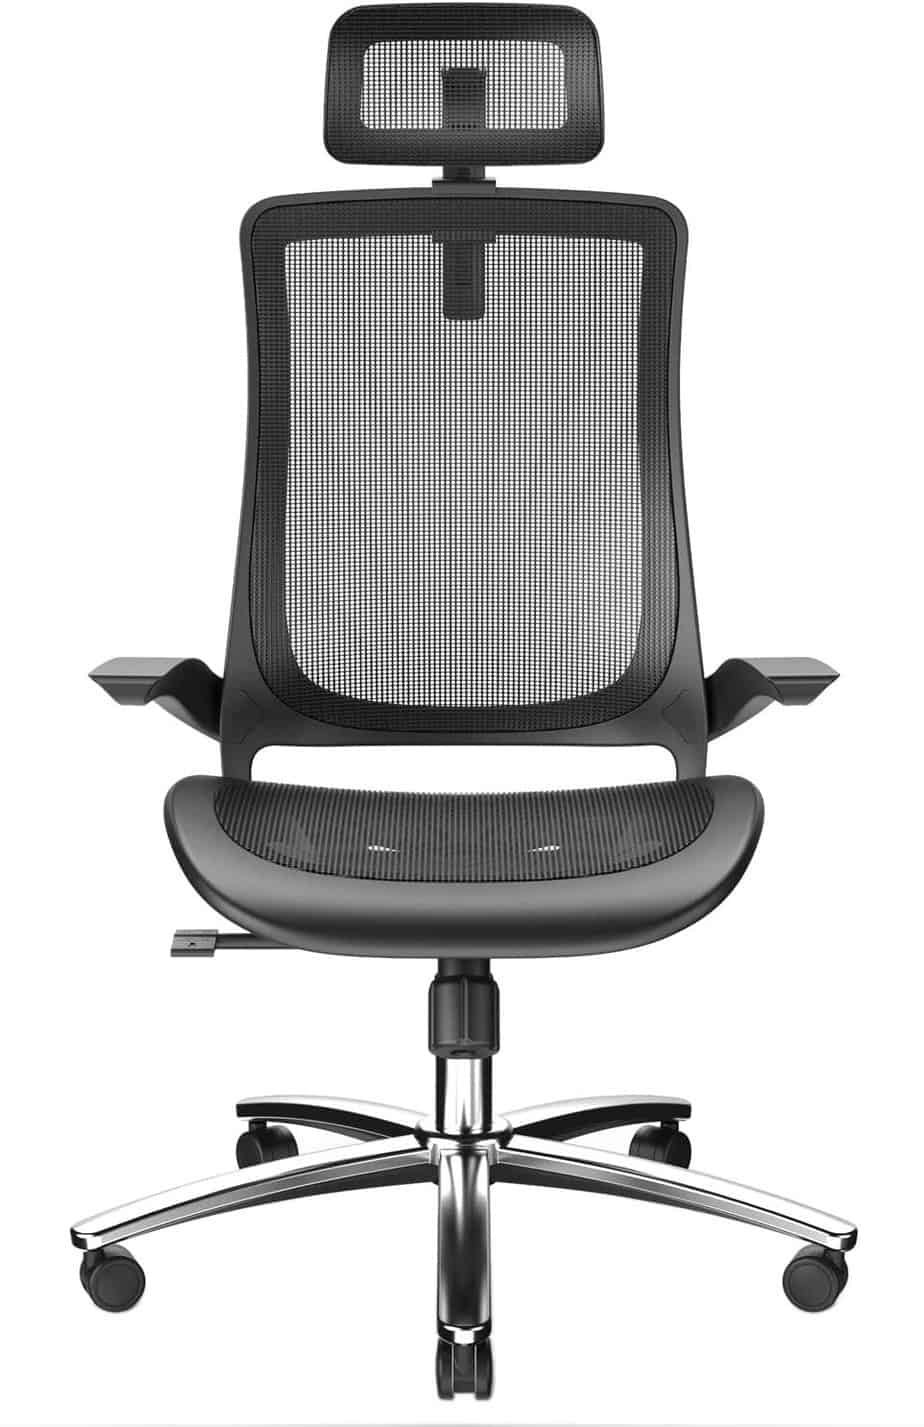 Bilko Office chair with breathable mesh seat and firm armrests